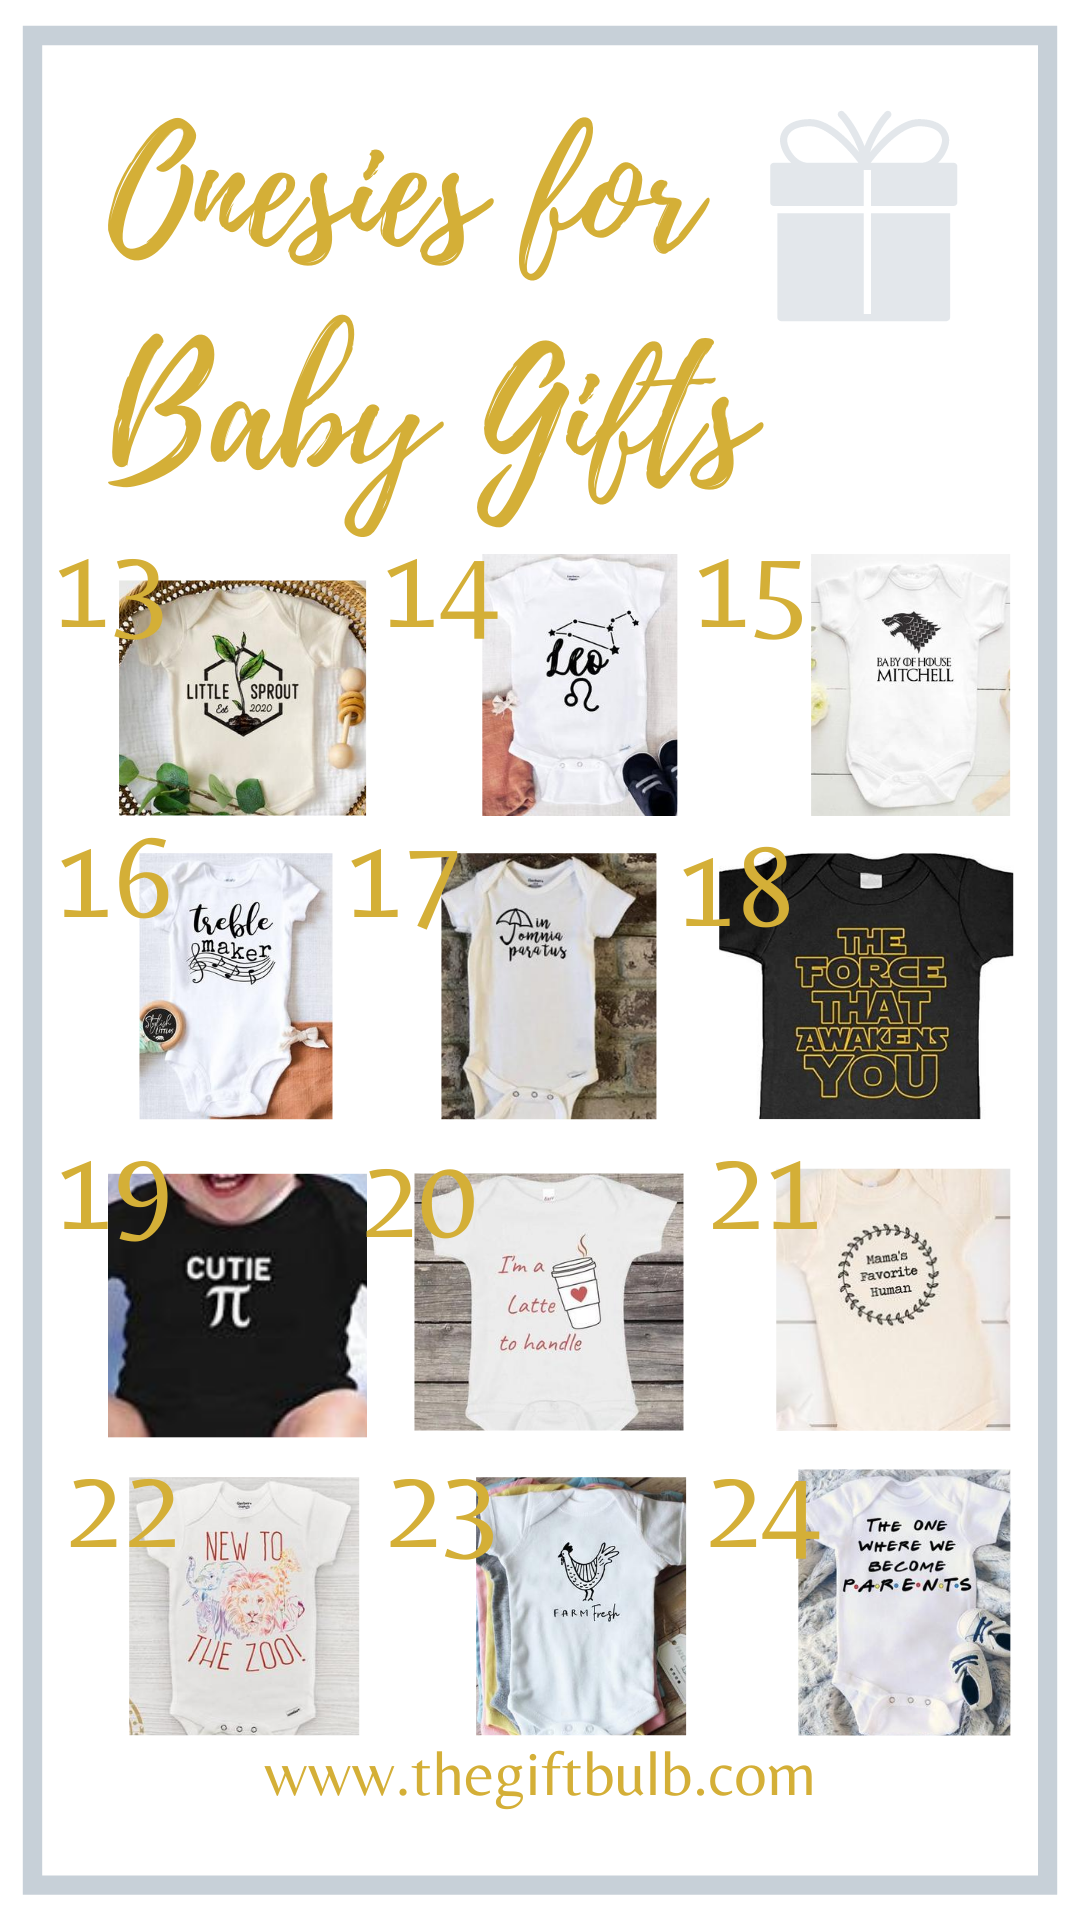 Unique Baby Gifts